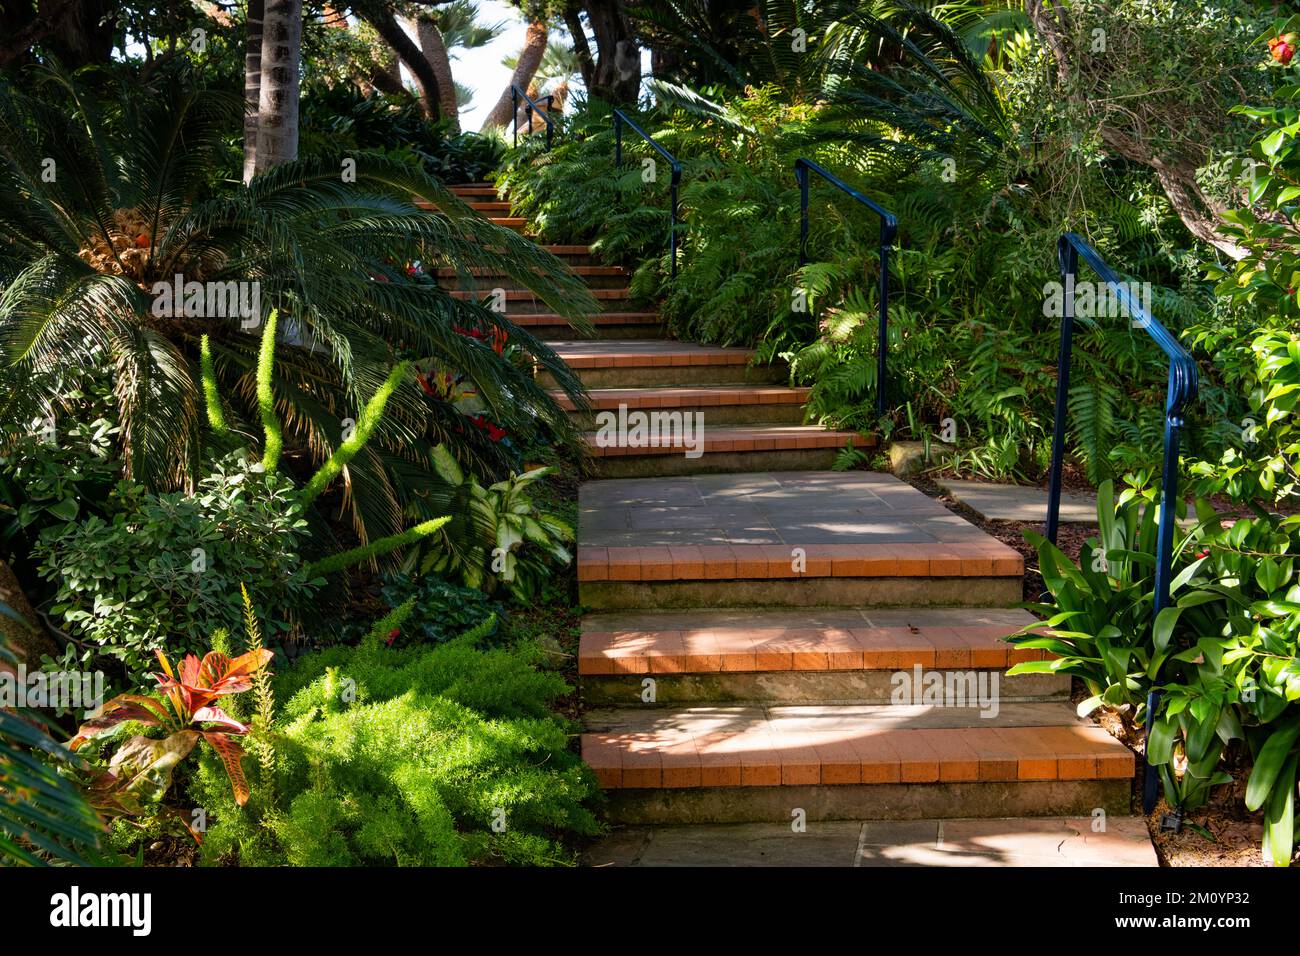 Stairs and path curving through lush green foliage in a tropical garden depicting theme of well-being Stock Photo